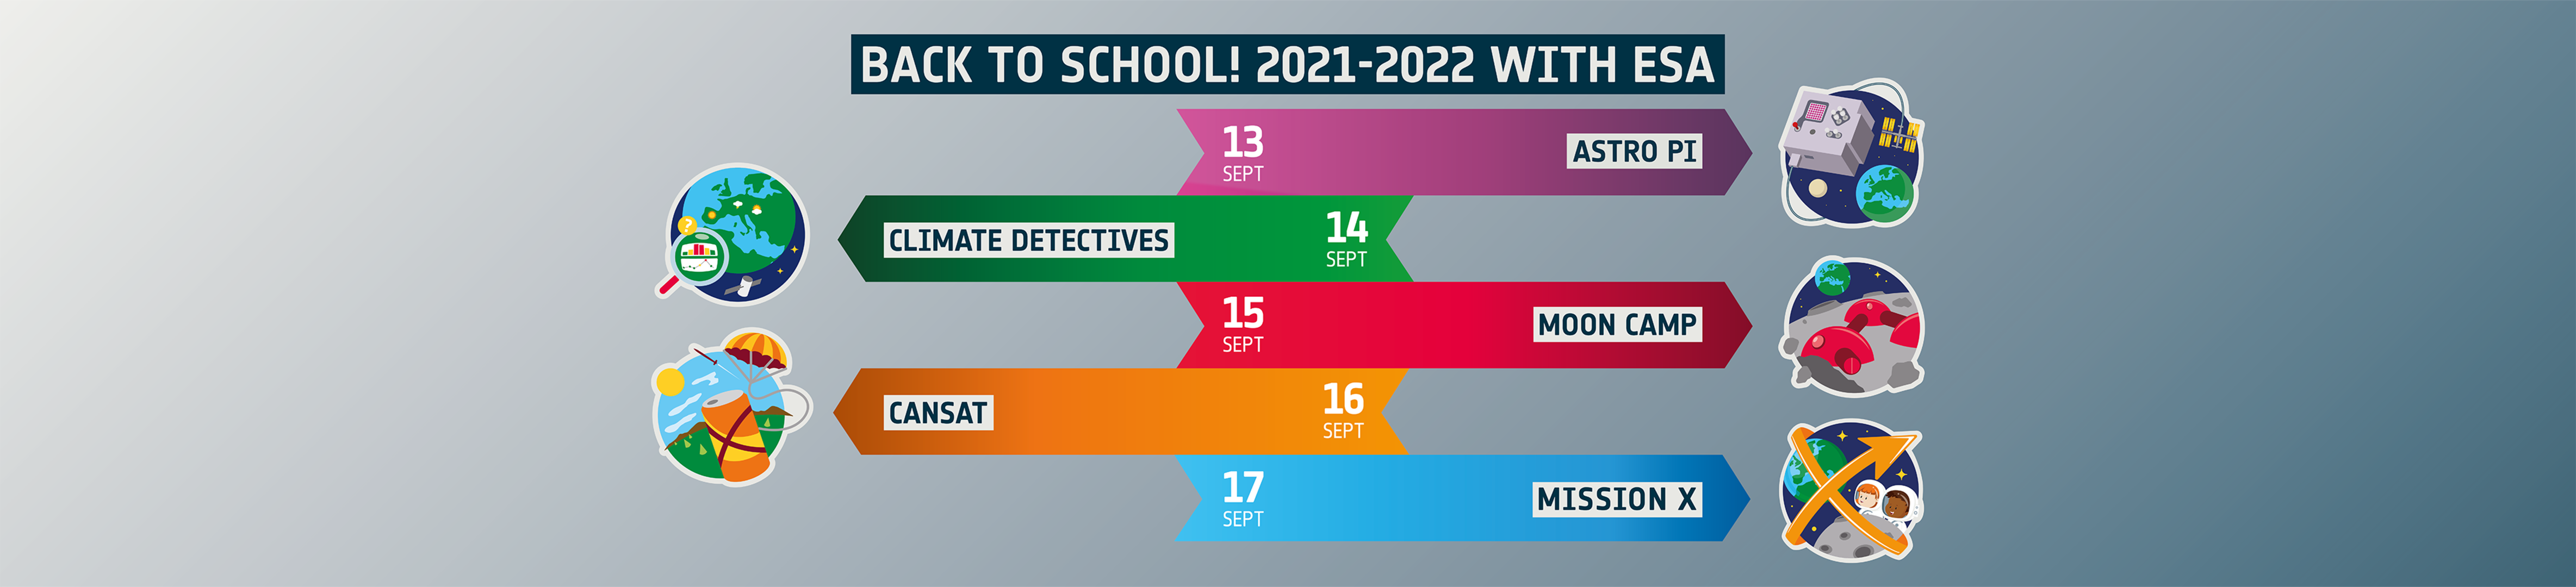 Back to School with ESA 2021-22 banner